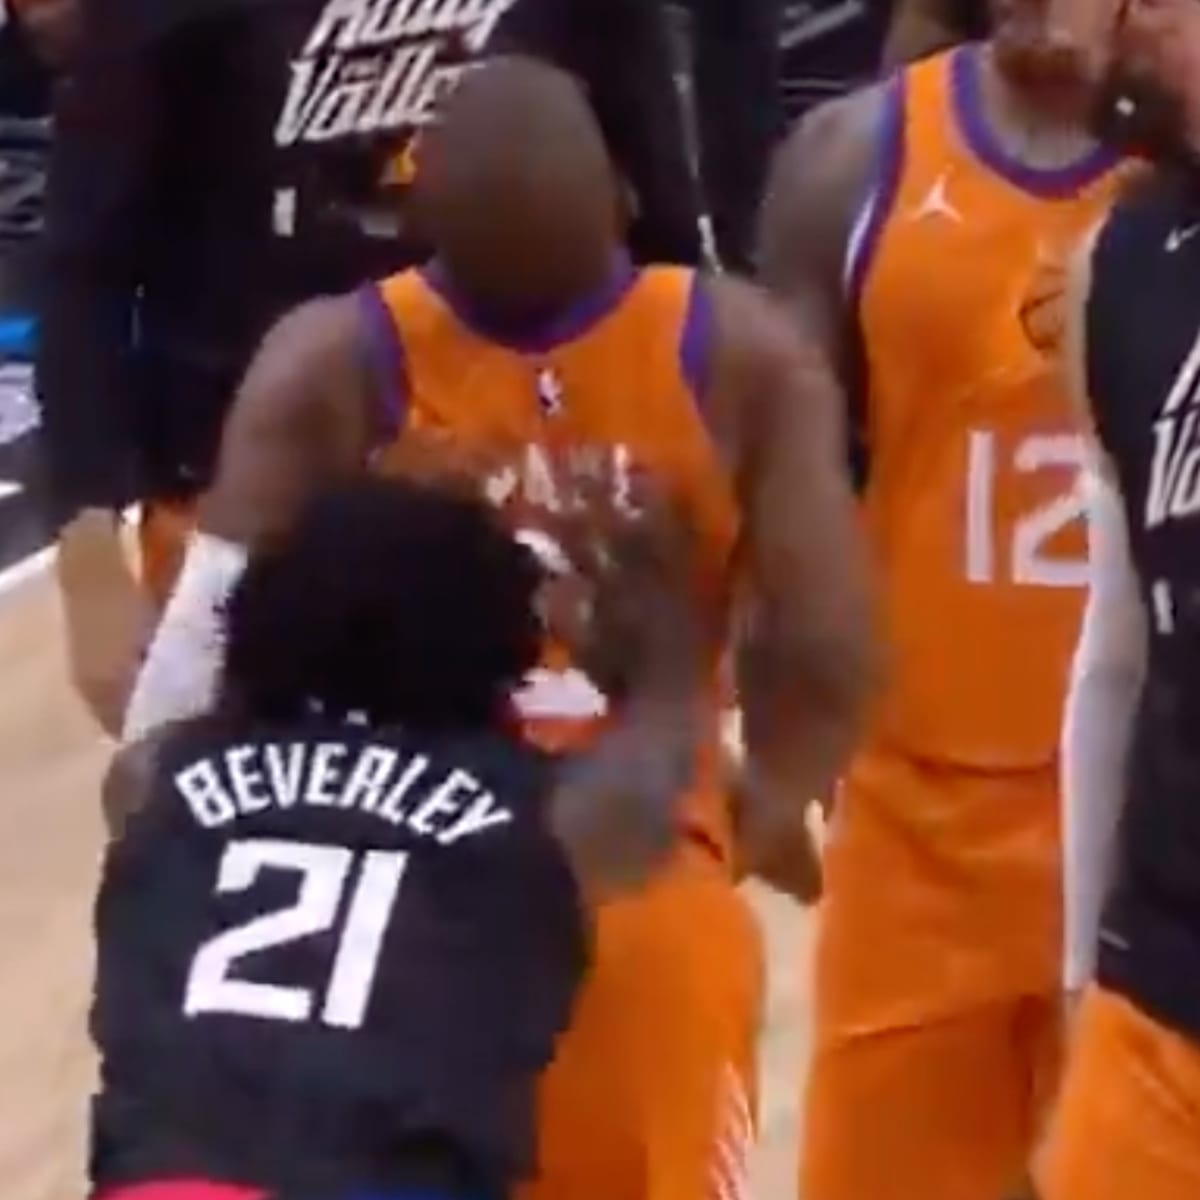 Patrick Beverley shoves Deandre Ayton, ejected in Suns win over Lakers